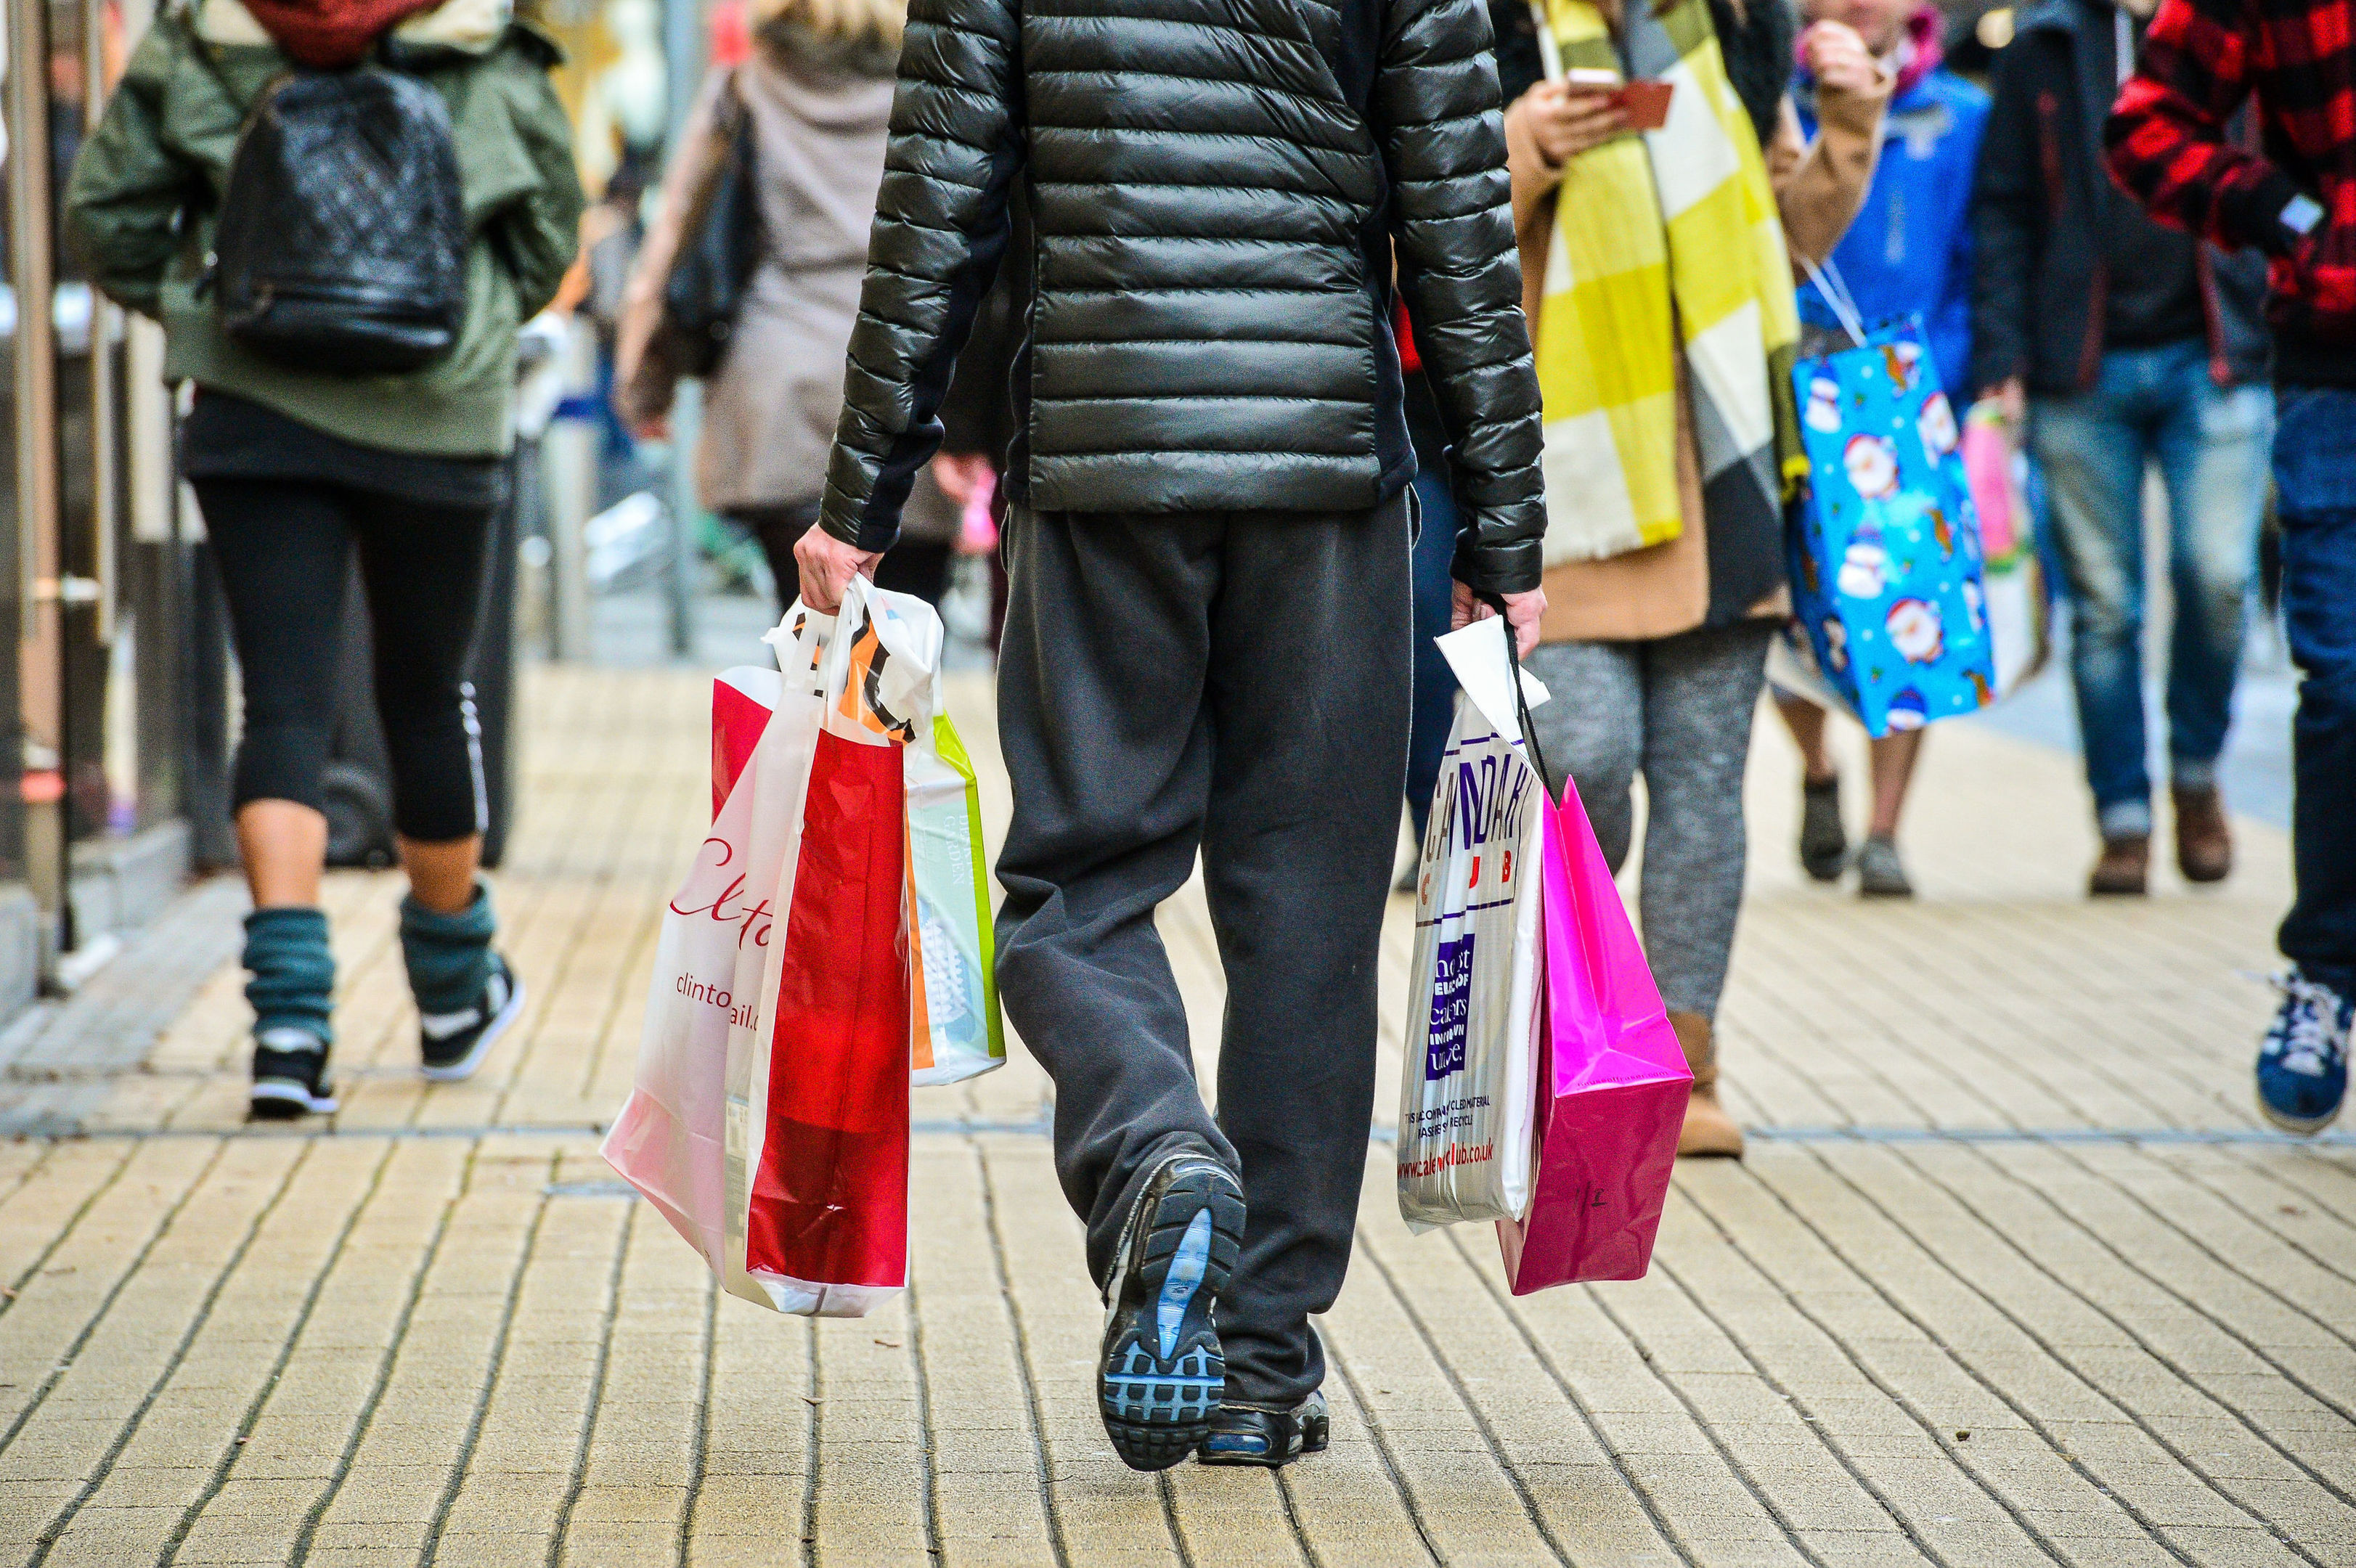 Reduction in retail crime in Ross-shire during festive season